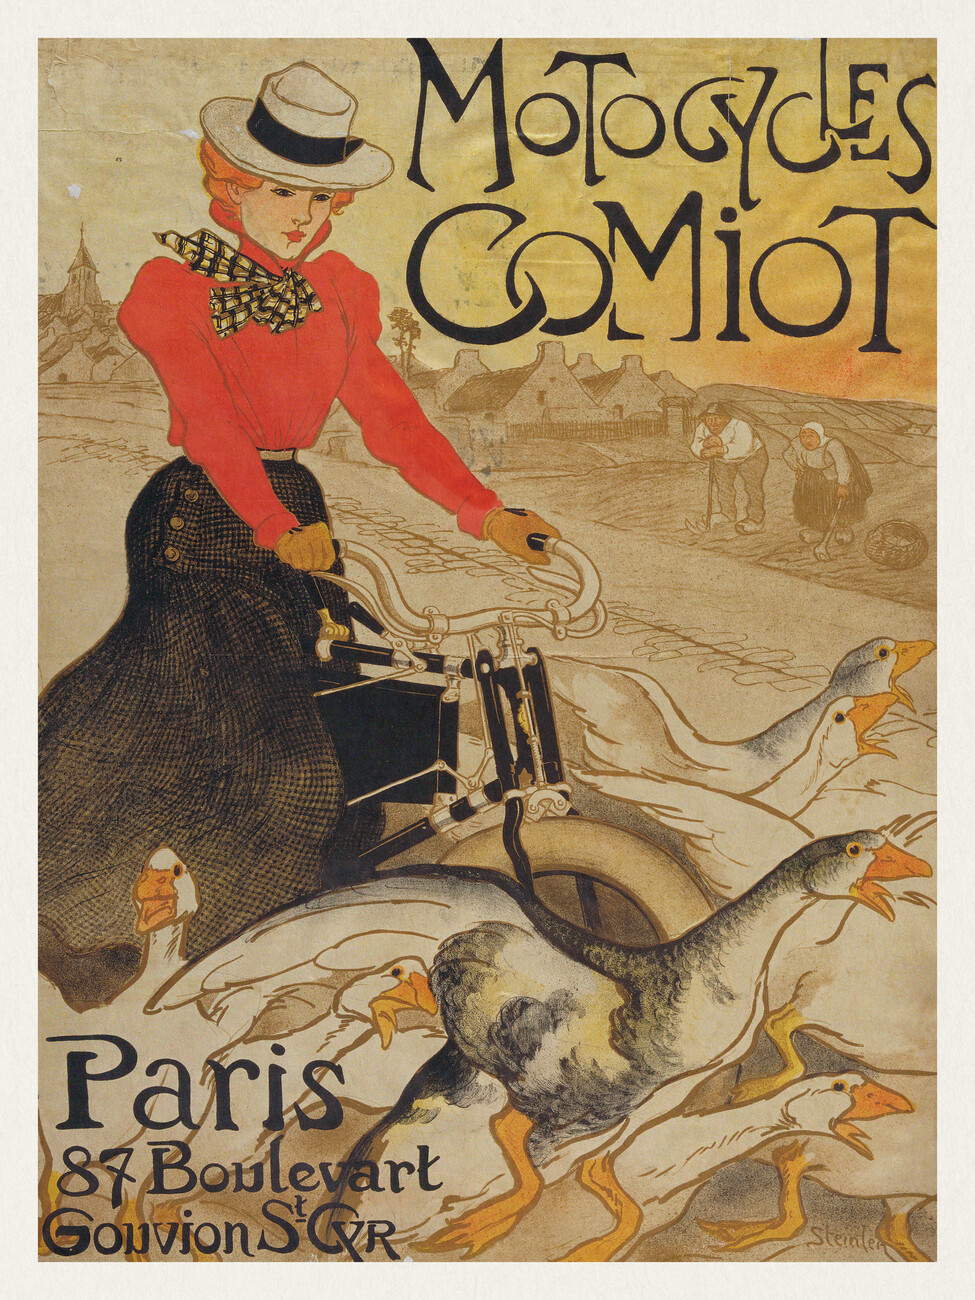 Motocycles Comiot (Vintage French Geese / Goose & Bike Poster)éophile Steinlen Wall Mural